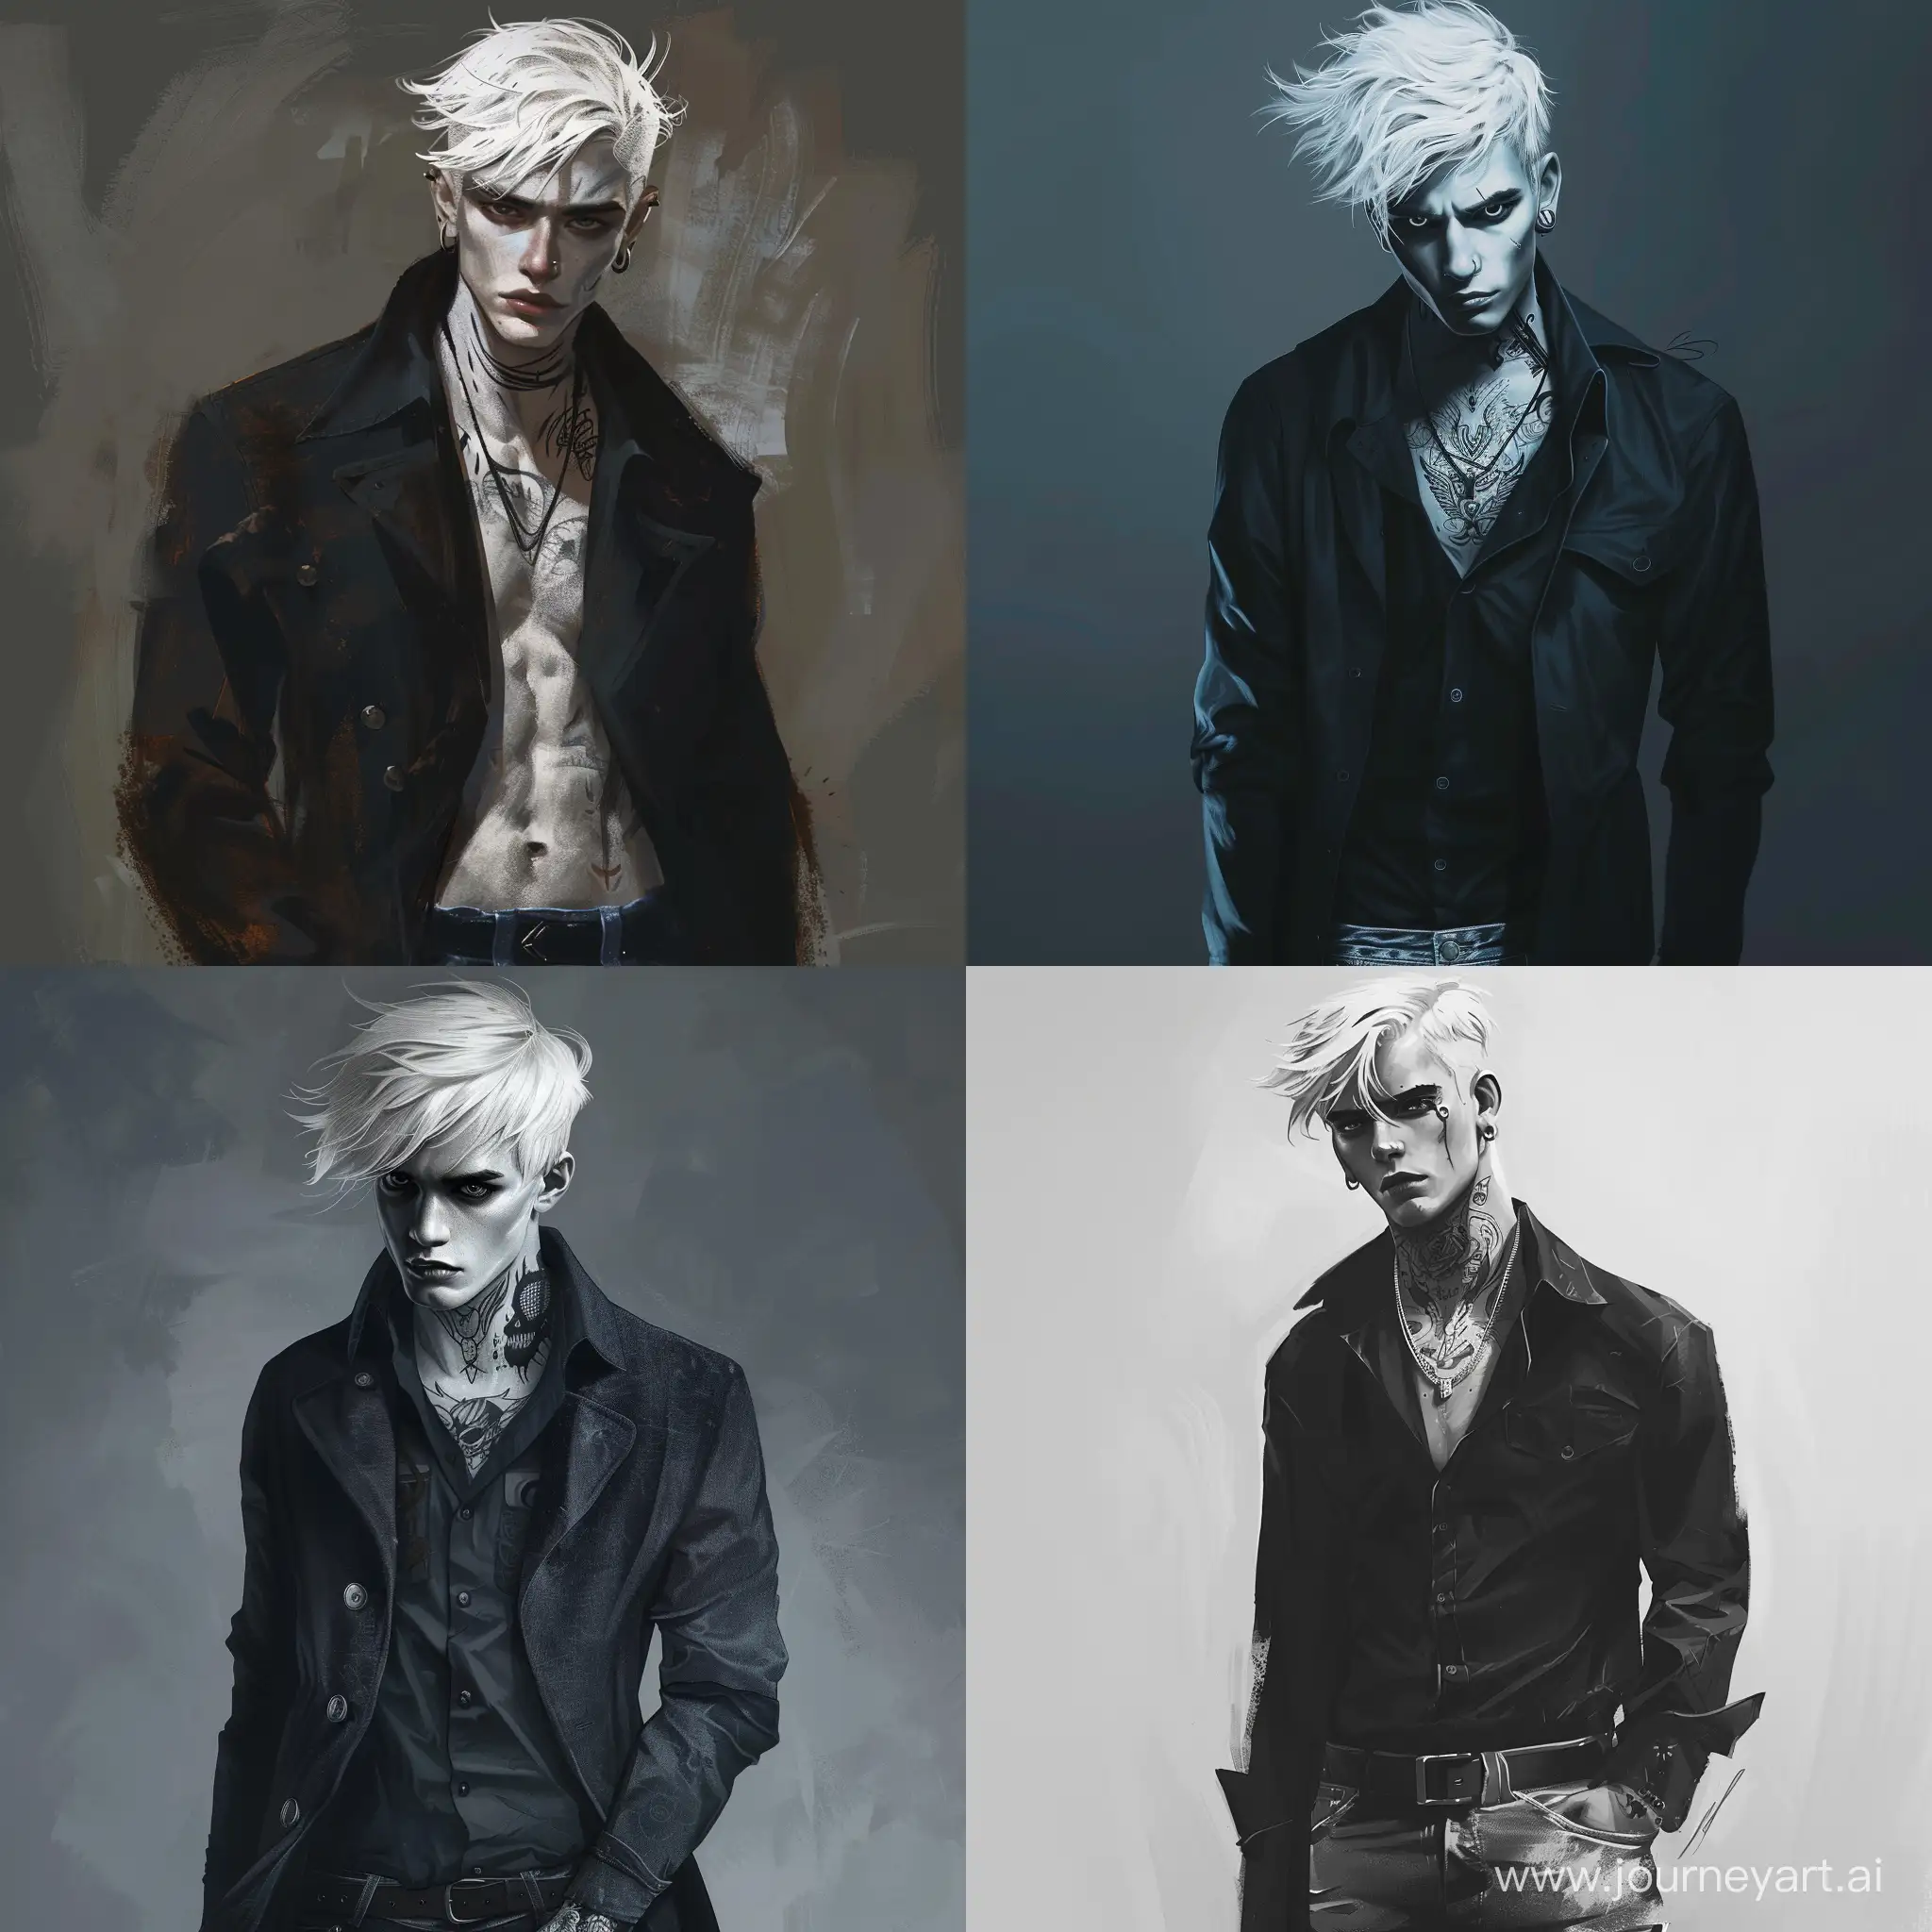 Handsome guy, white hair, black eyes, white skin, young, teenager, 19 years old, fit, dangerous, predatory facial features, neck tattoos, wearing a coat shirt and jeans, high quality, high detail, realistic art